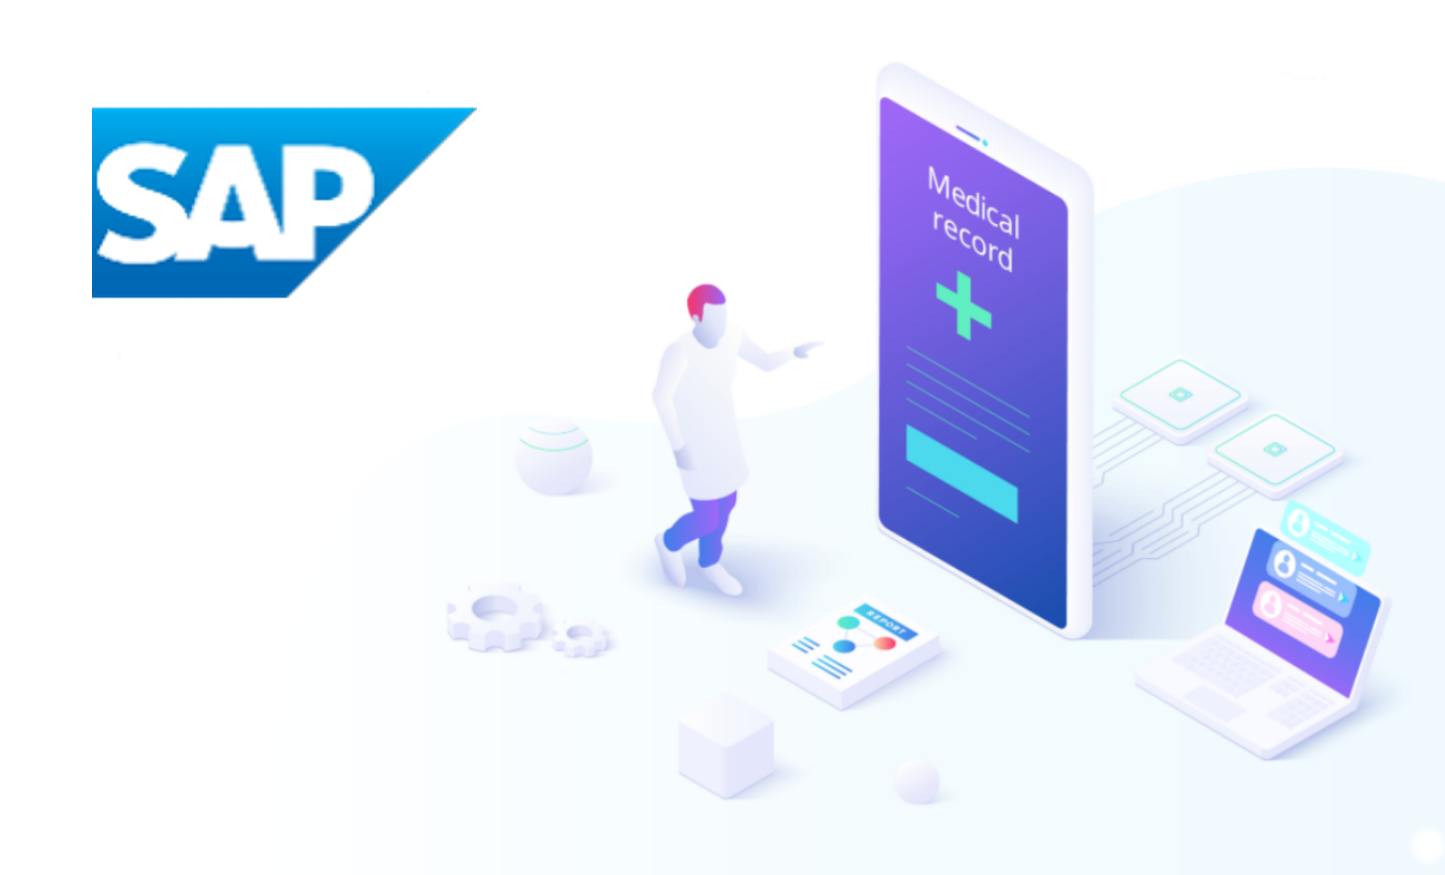 SAP Healthcare Review: Pros and Cons, Prices, Services, and More